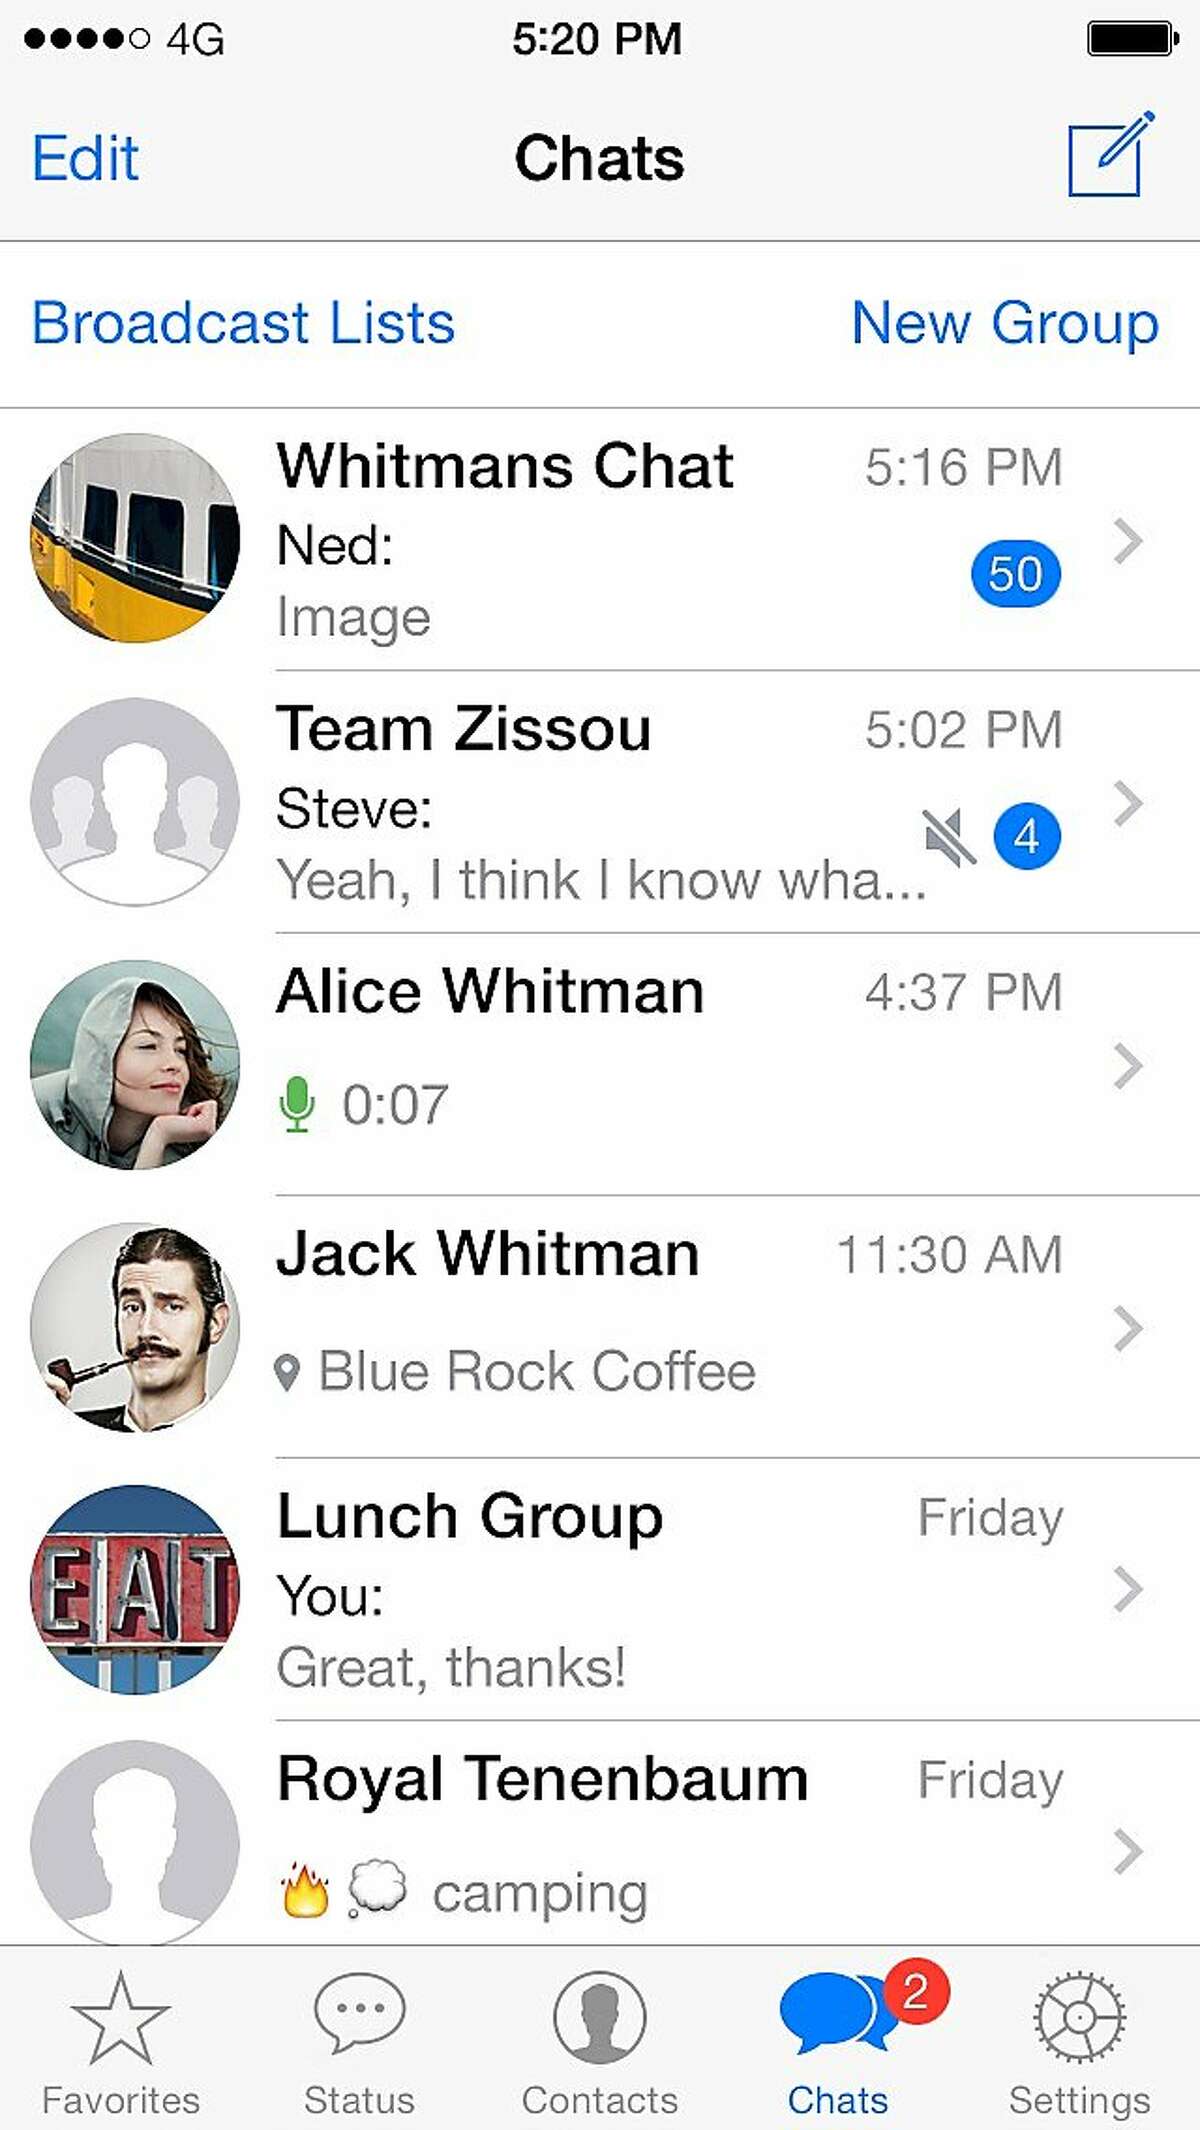 Screenshots of Whatsapp's mobile chat app for various platforms.